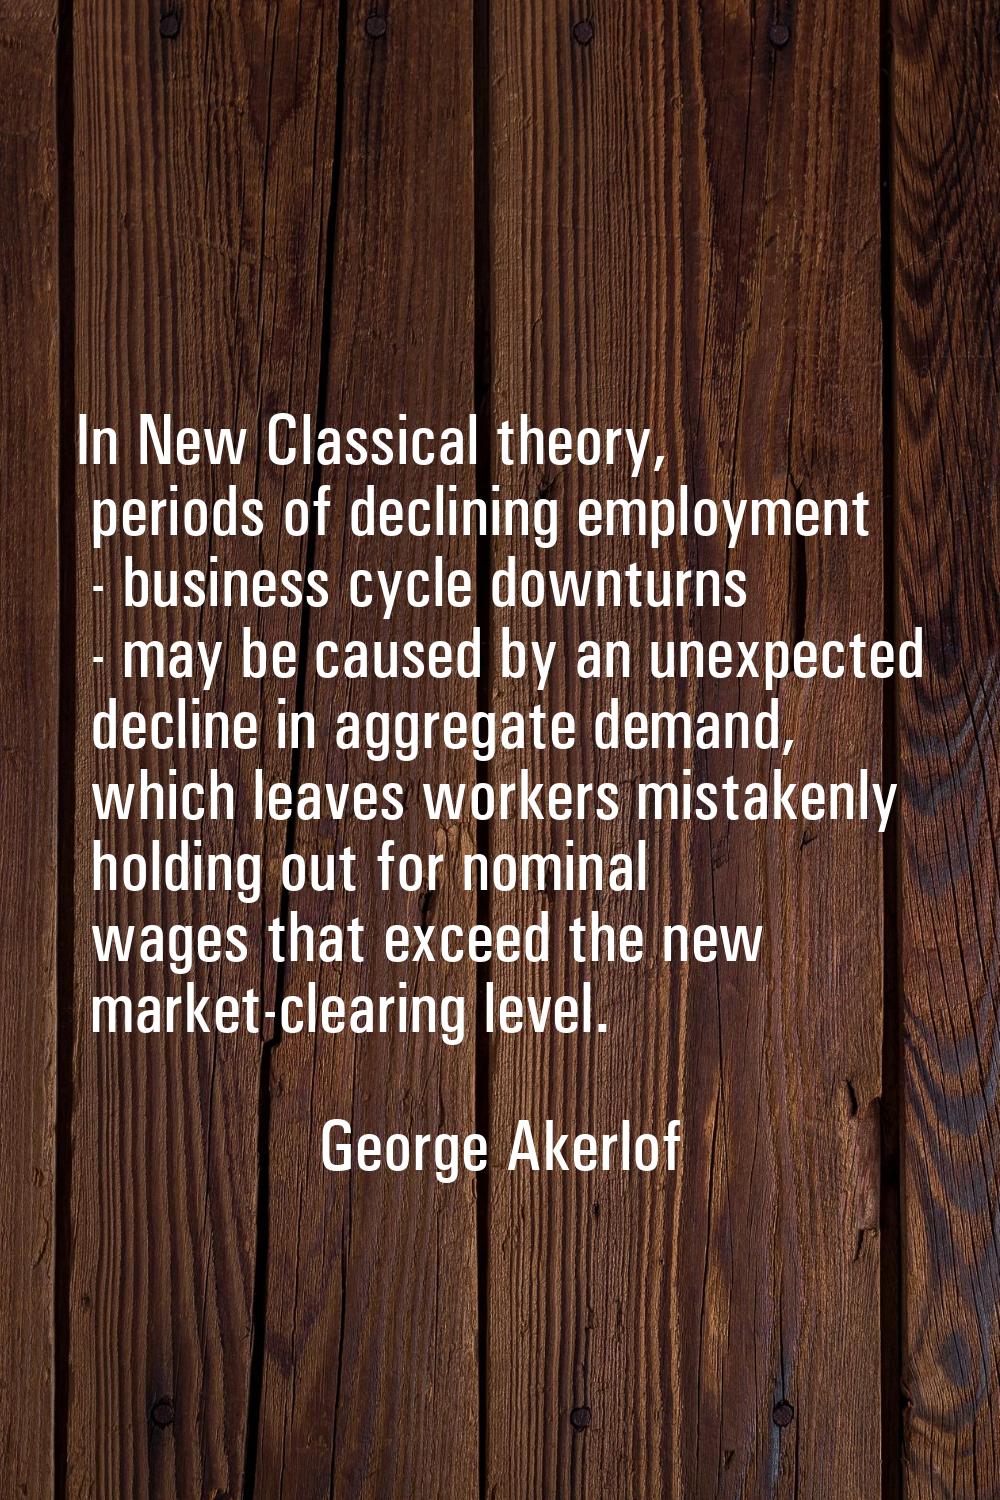 In New Classical theory, periods of declining employment - business cycle downturns - may be caused